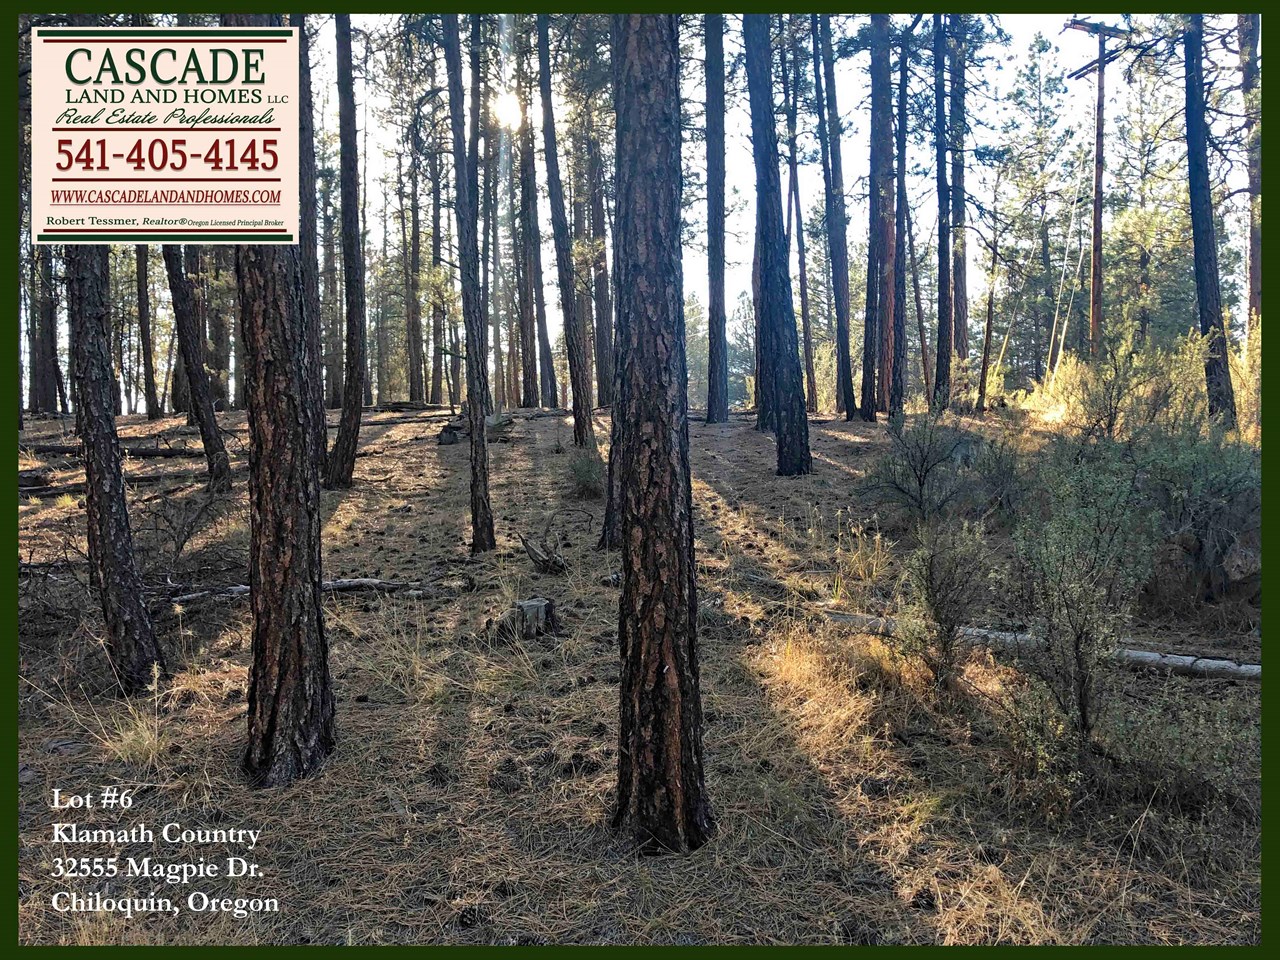 the large, mature pines on this property offer privacy and a feeling of being surrounded by wilderness! it's walking distance to the sprague river from the property, and there is a public access point right across the street! the property would need a well, septic and power. power is nearby and the county well logs show that wells in this area are productive and not too deep. the property is located between the communities of chiloquin and sprague river, and is accessed by well maintained roads.